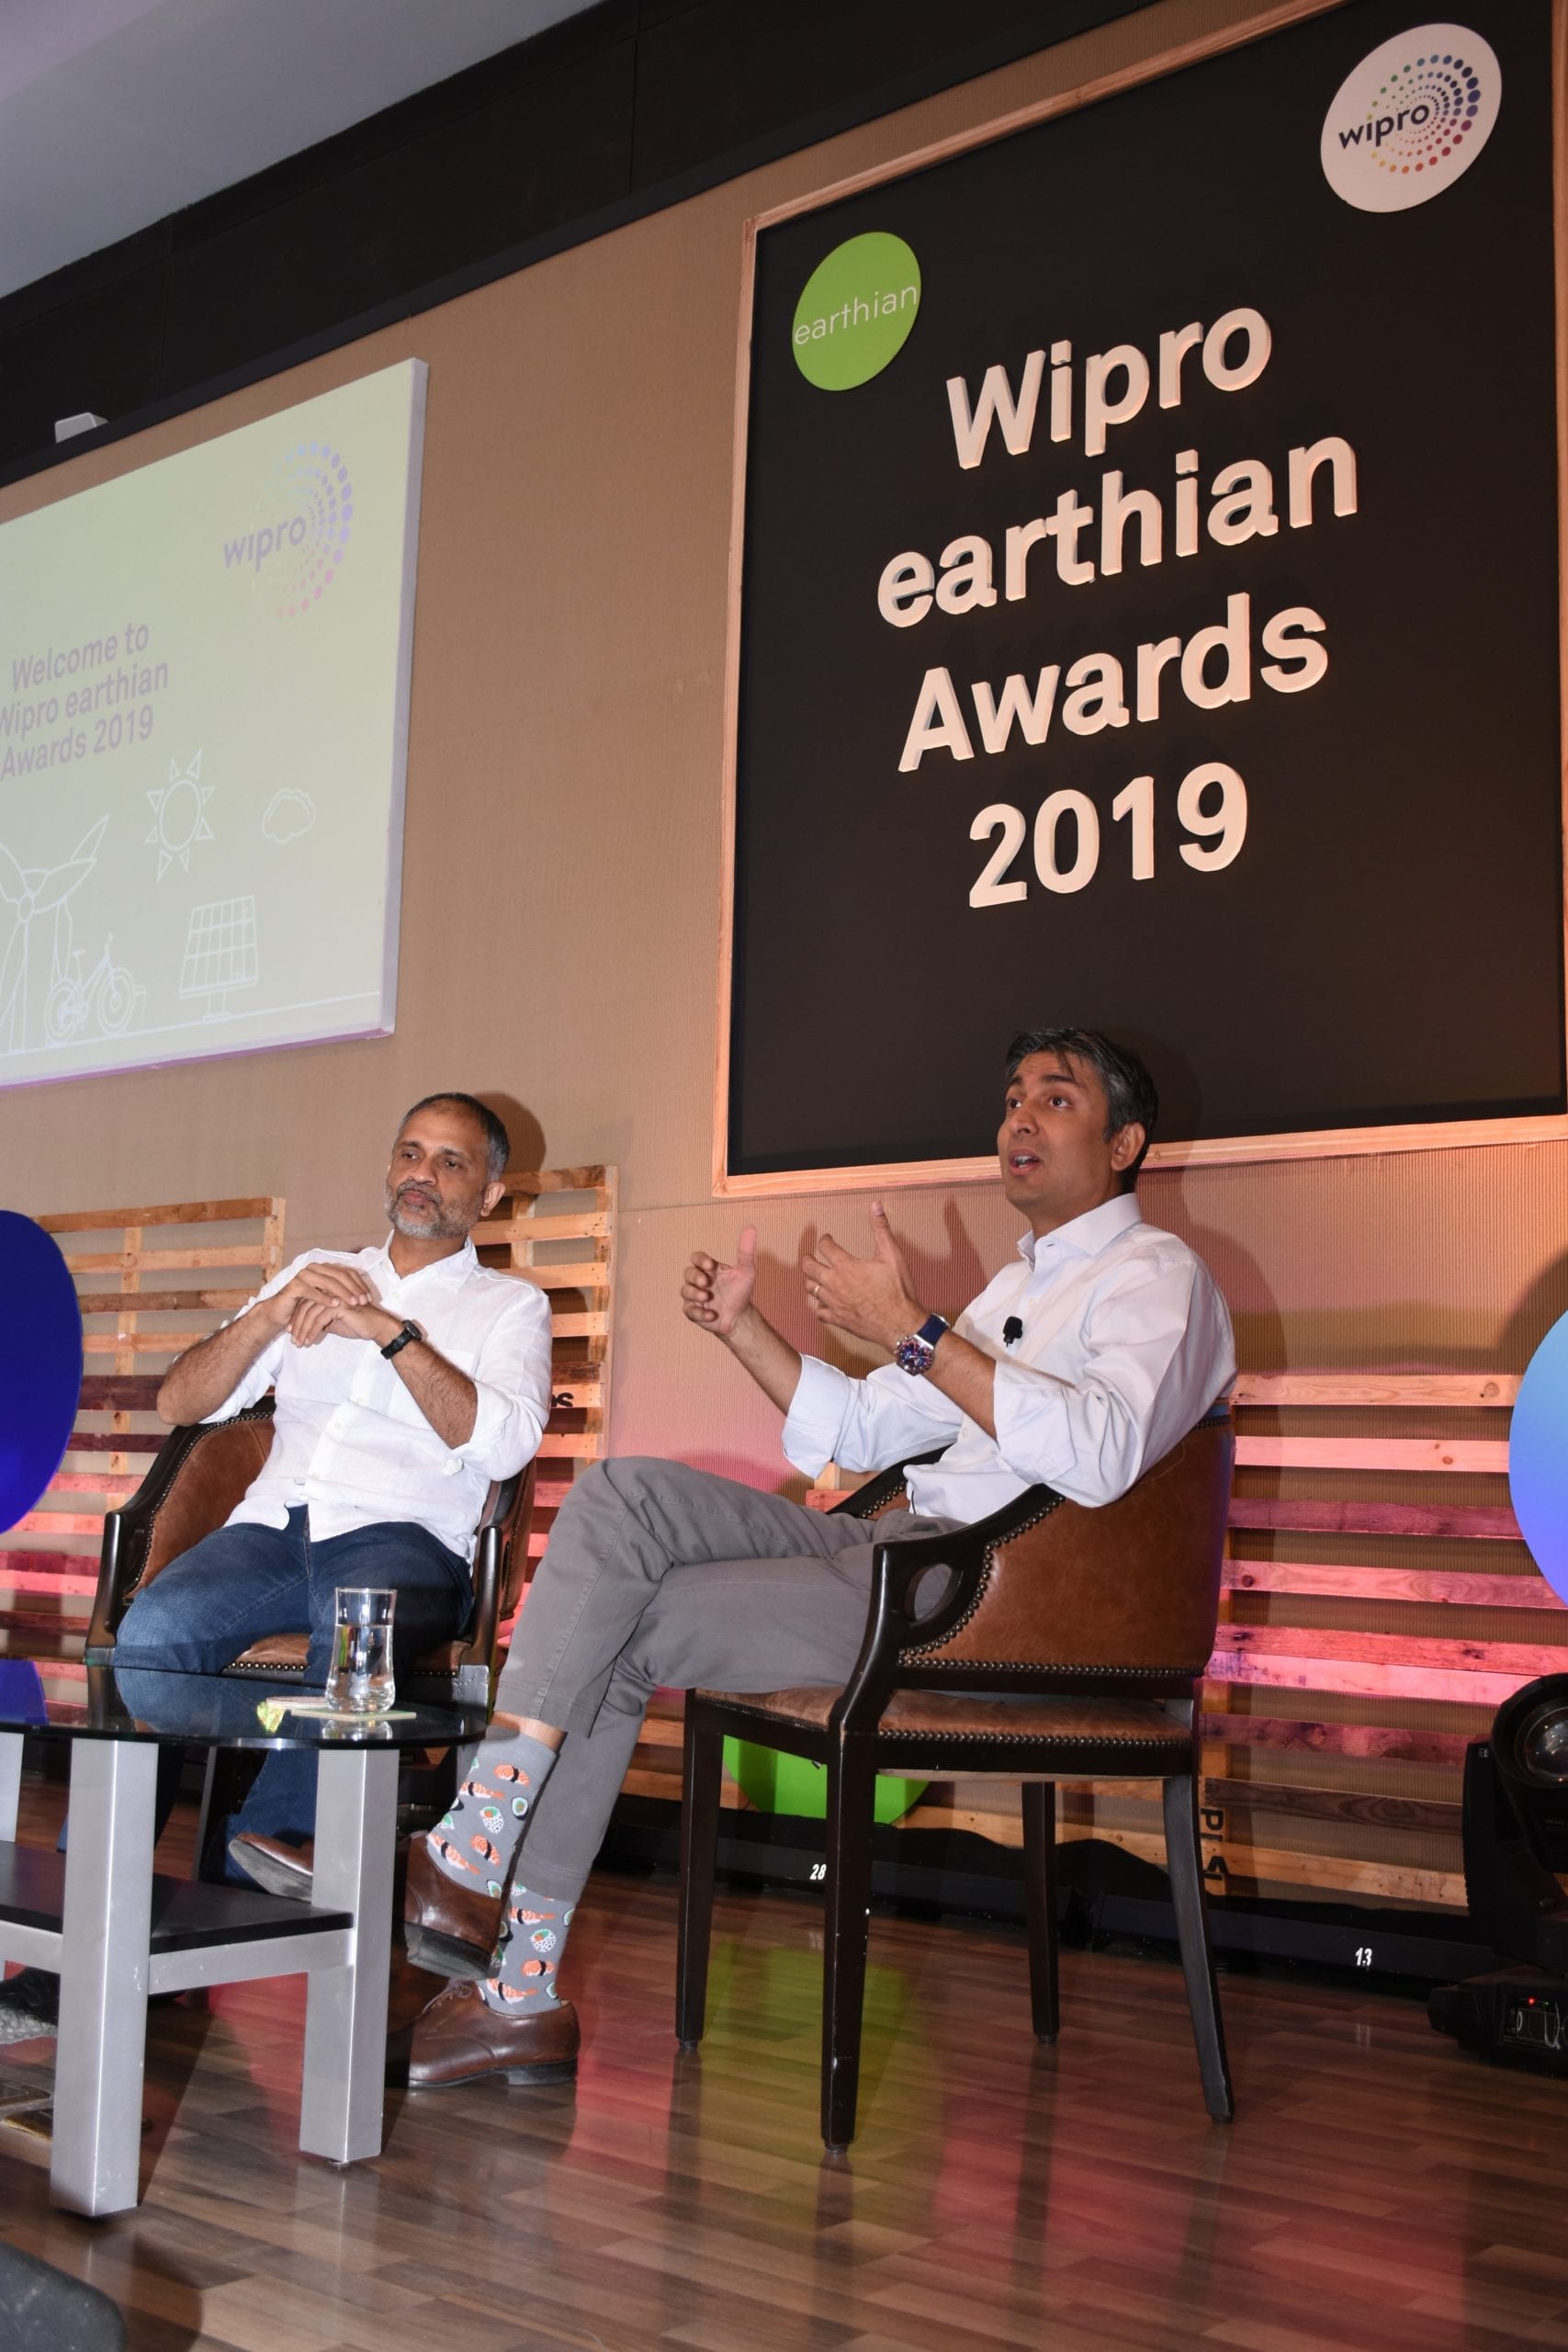 Rishad Premji Chairman Wipro Limited and Anurag Behar Chief Sustainability Officer Wipro Limited in conversation with students at the Wipro earthian awards 2019 scaled